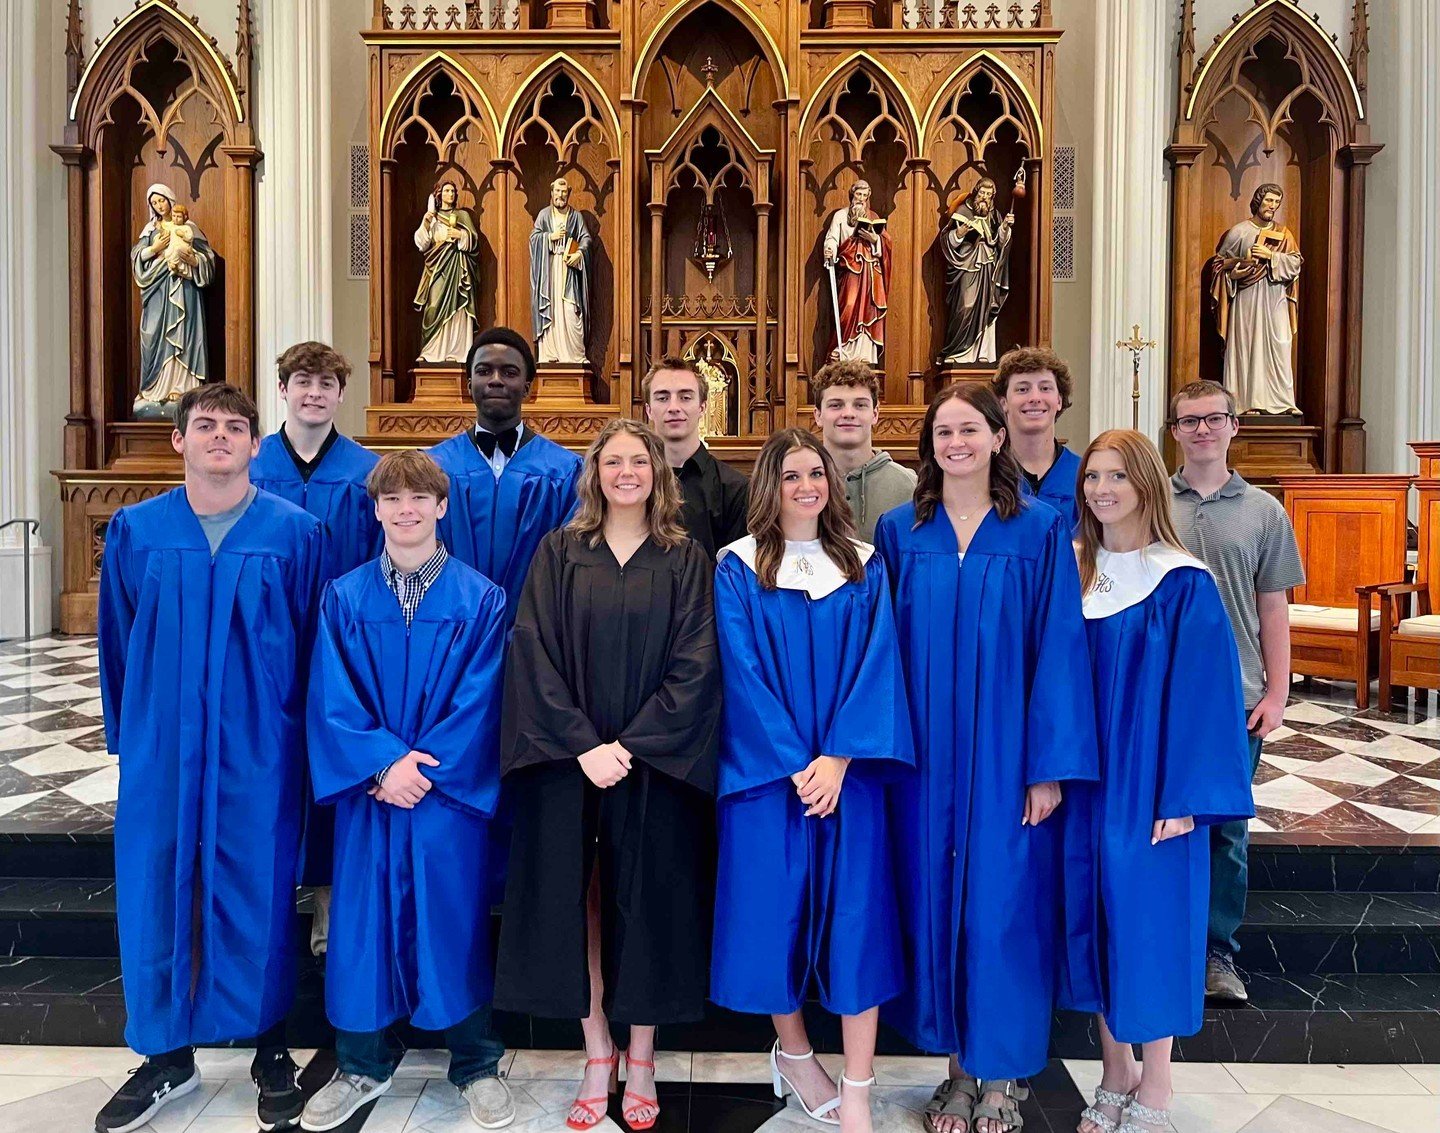 Today was &ldquo;Graduate Blessing&rdquo; day! Congratulations to all the graduating seniors of our parish community!